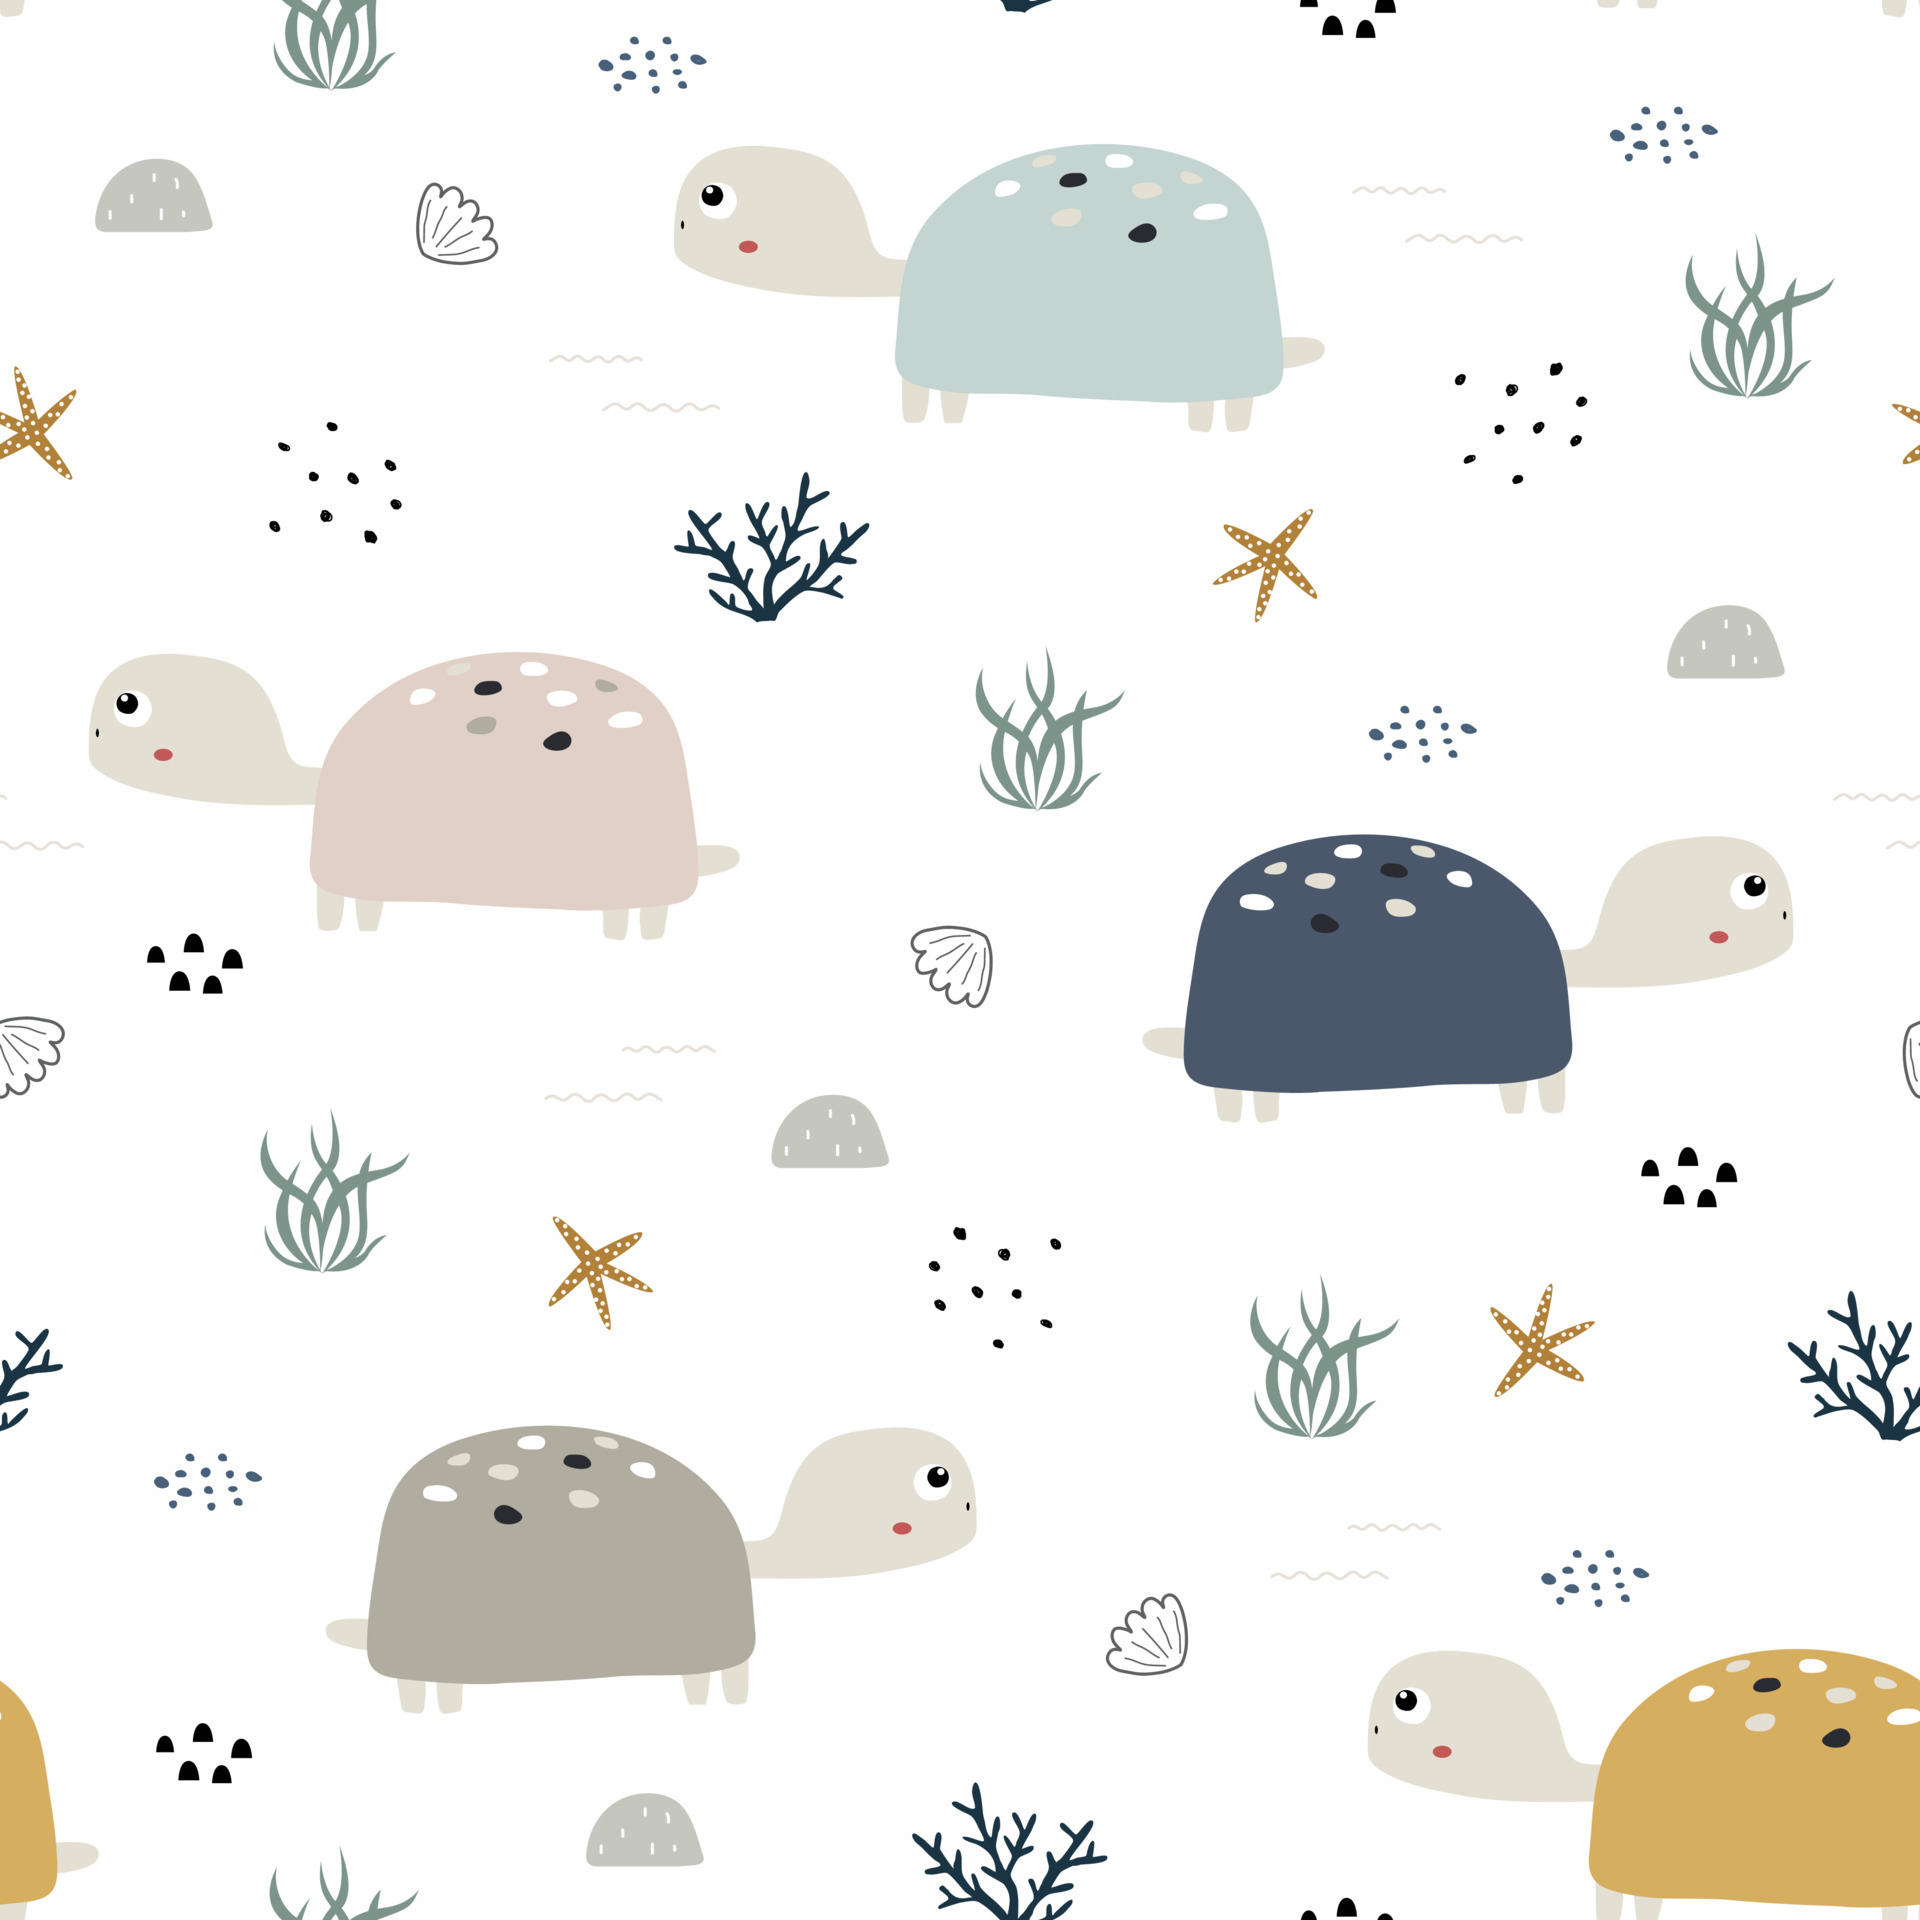 Turtle seamless pattern Cute cartoon animal background Hand drawn design in kid style, use for fabric, textile, print, wallpaper. Vector illustration